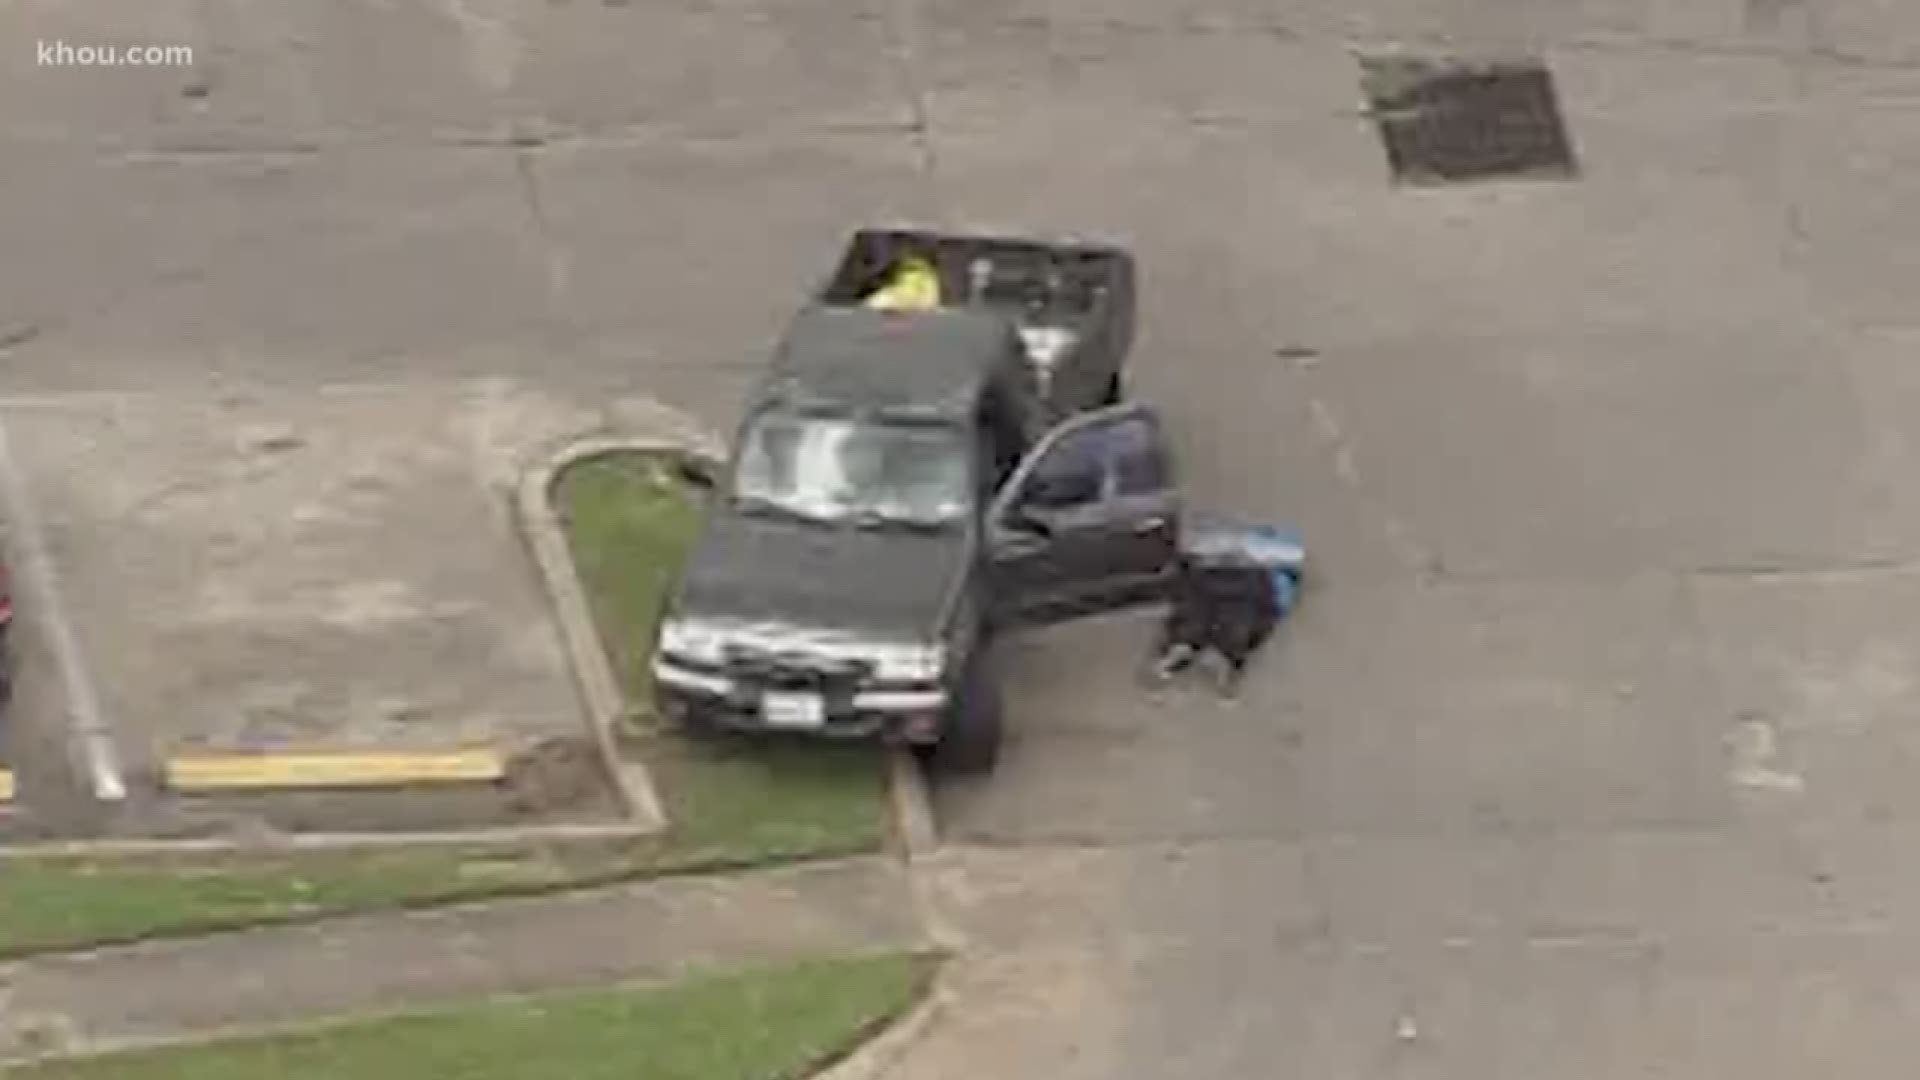 A wild chase came to an end in southeast Houston Thursday, with the police using a PIT maneuver to make an arrest. The owner of the truck said he was in church Sunday morning when it was stolen from the church's parking lot.